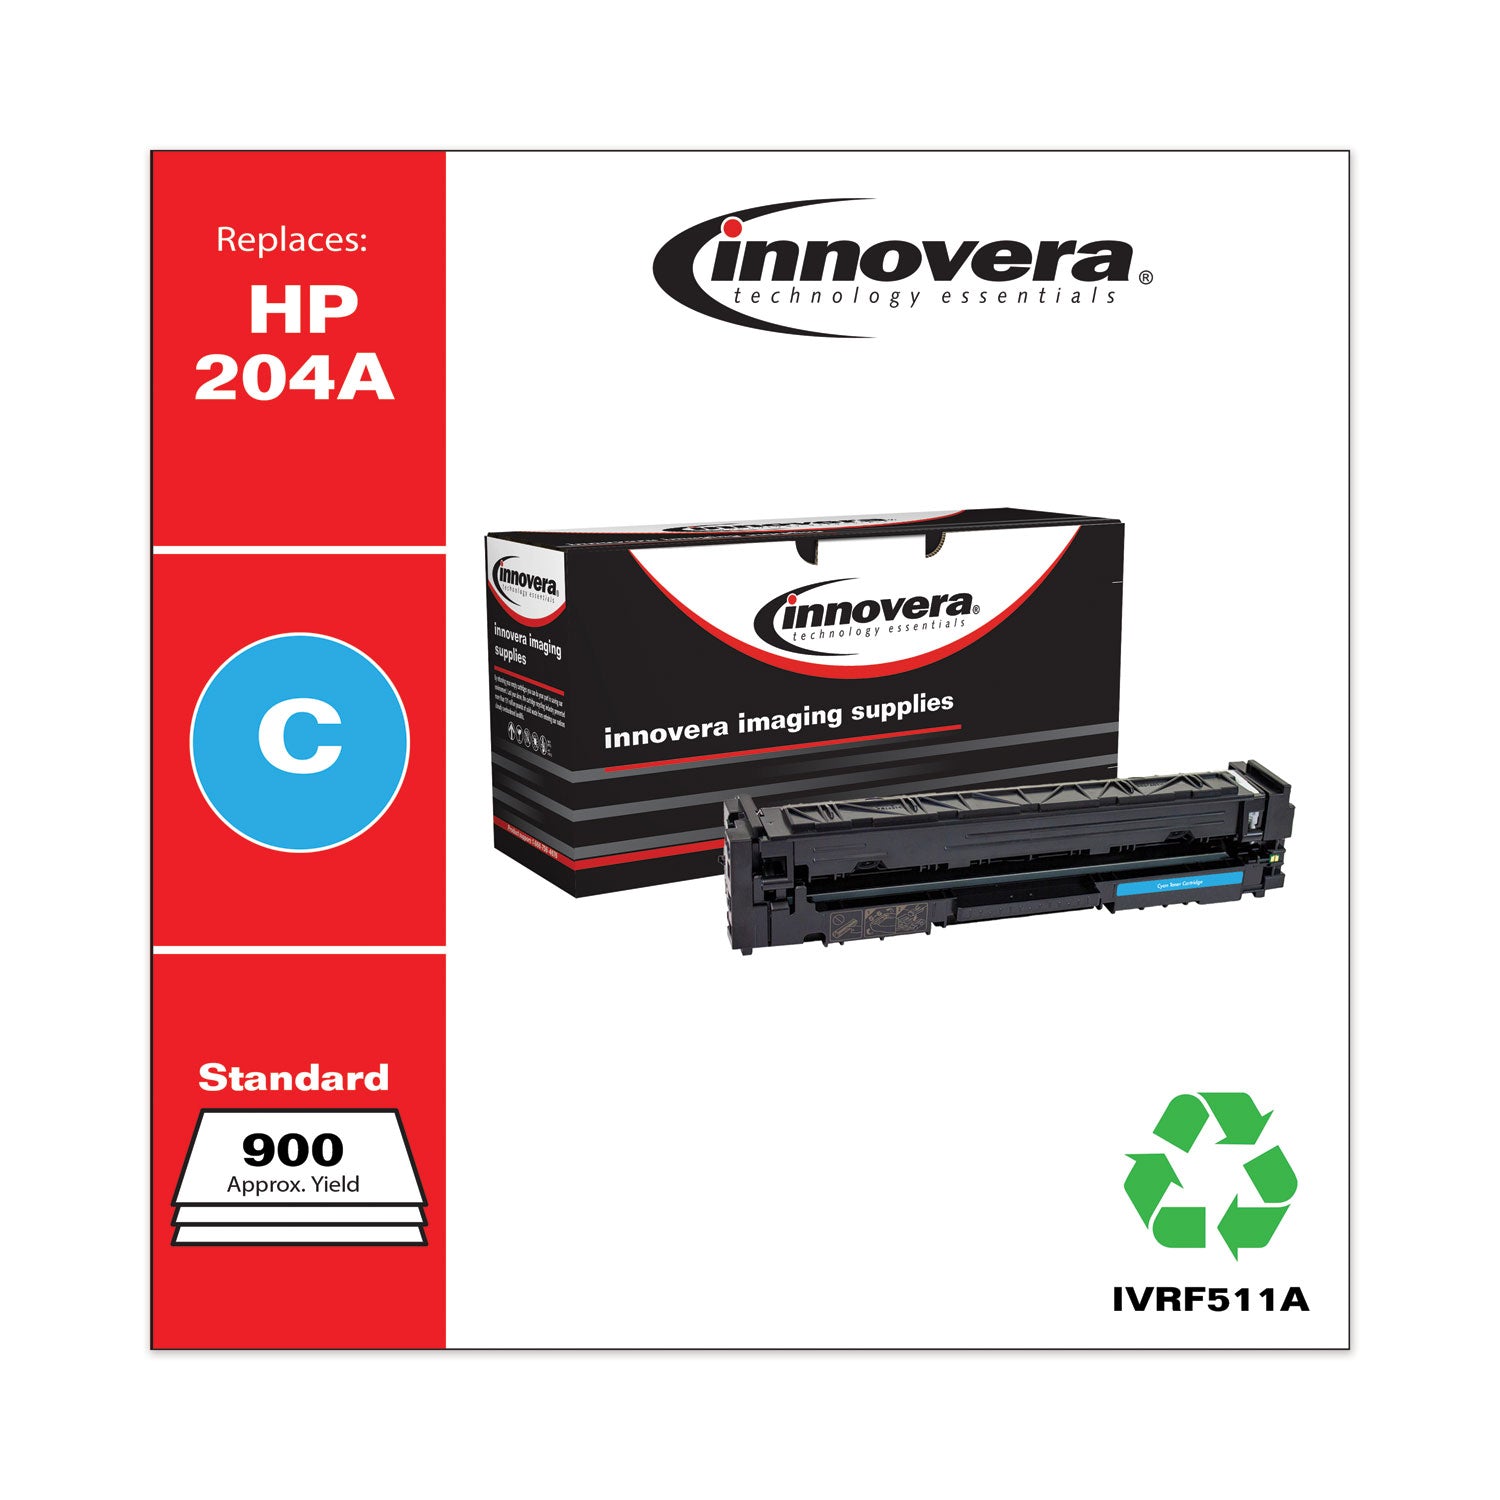 remanufactured-cyan-toner-replacement-for-204a-cf511a-900-page-yield_ivrf511a - 2